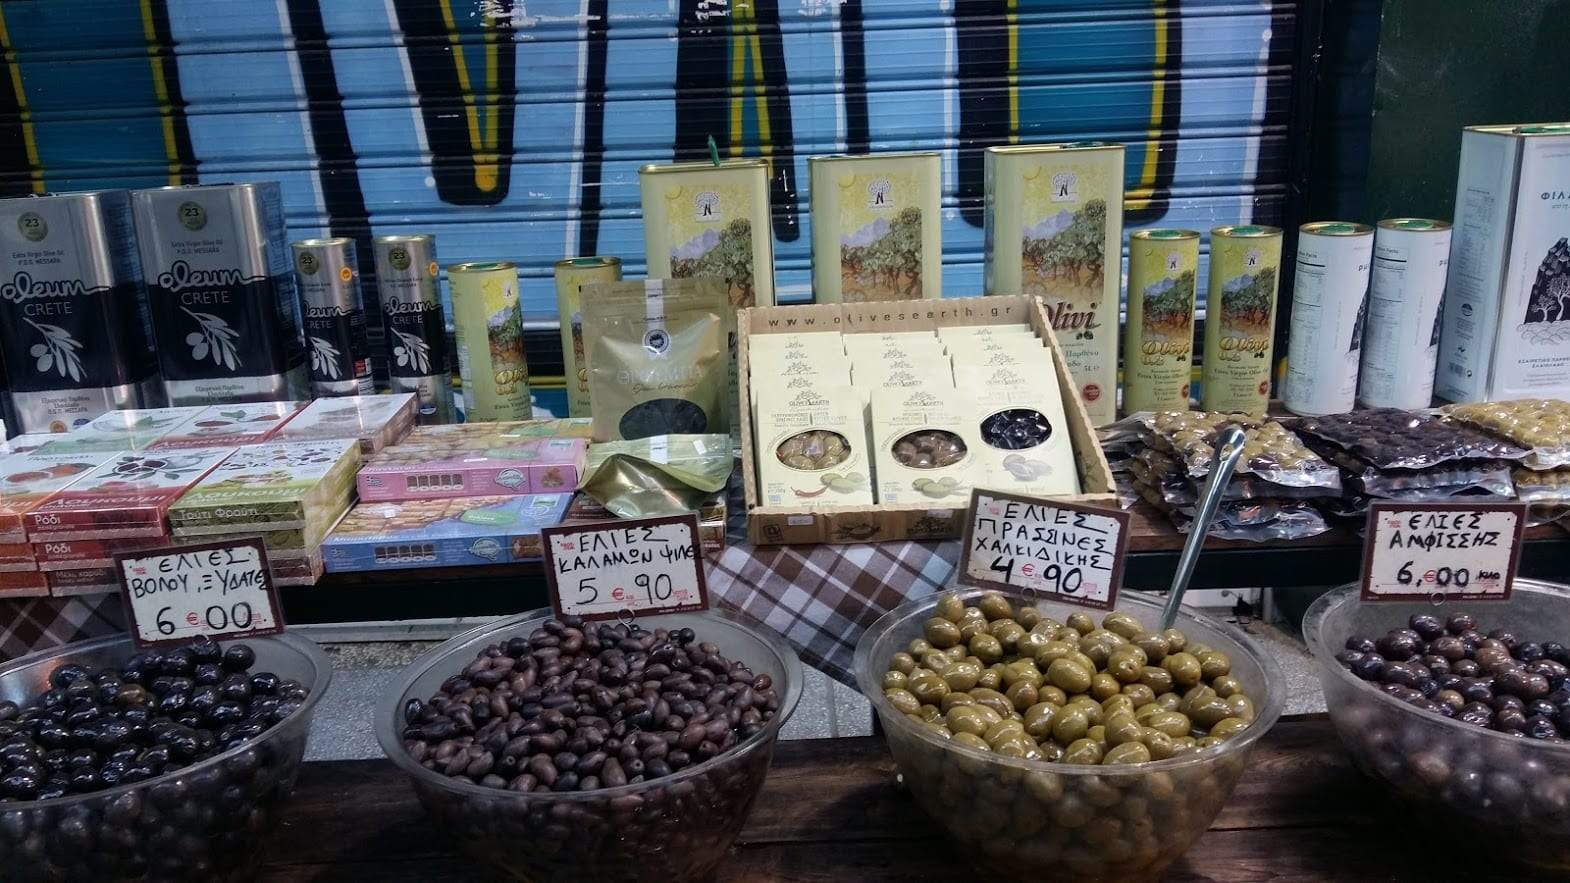 The markets in Thessaloniki provide the perfect opportunity to stock up on tasty olives!